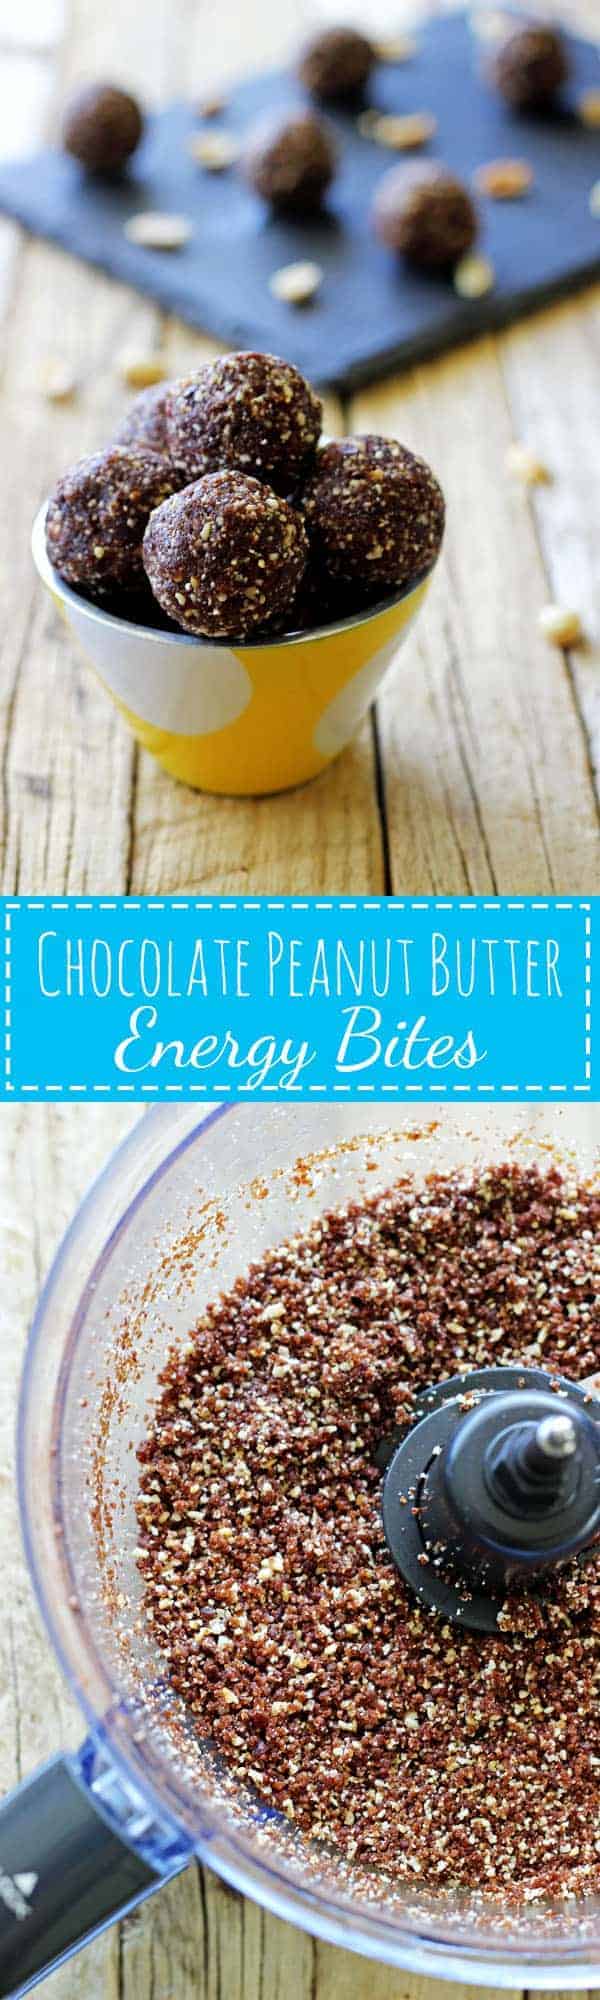 The perfect healthy snack option for kids and grown ups - chocolate peanut butter energy bites! Quick & easy to make and delicious to eat any time of day! | thekiwicountrygirl.com